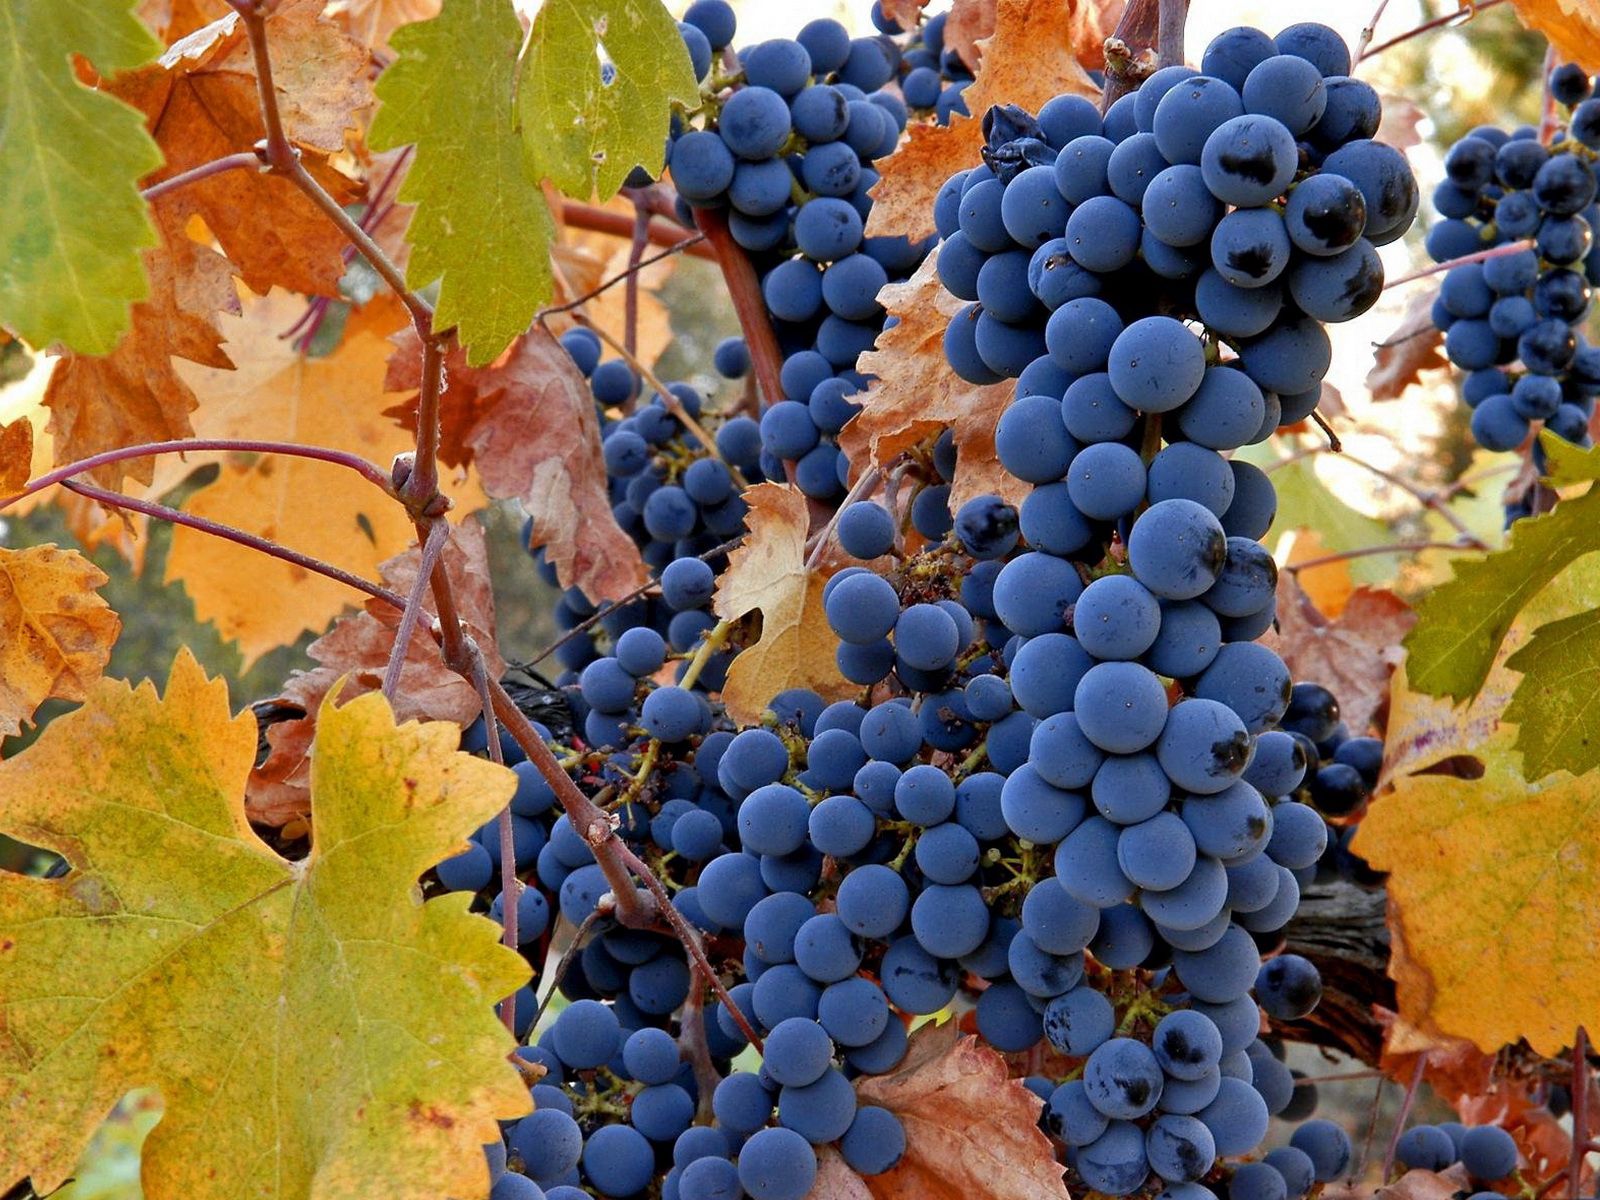 leaves, grapes, fruits, bunches, autumn, food, vine, clusters, harvest